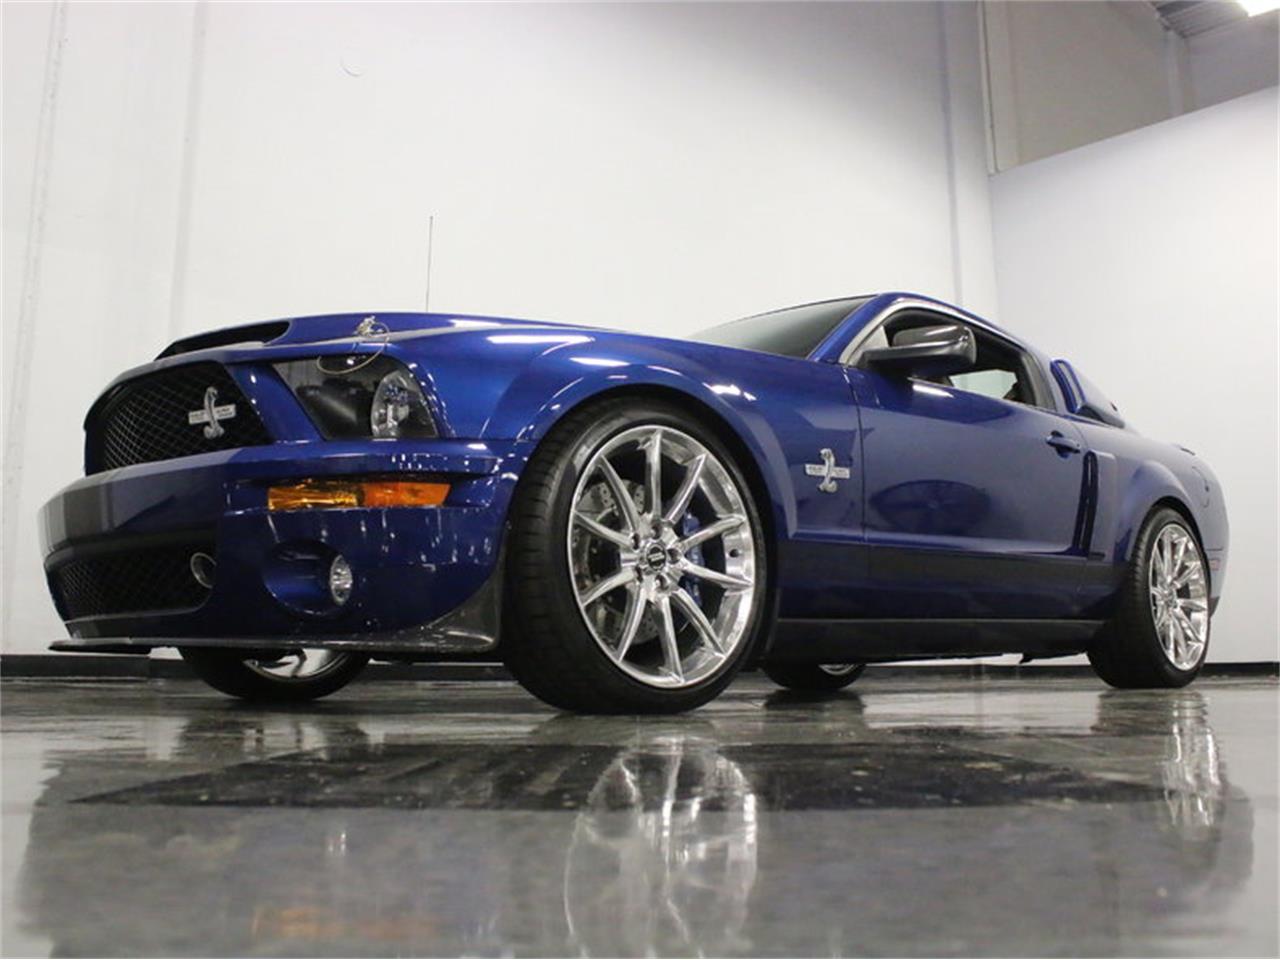 2008 Ford Mustang Shelby GT500 Super Snake for Sale ...